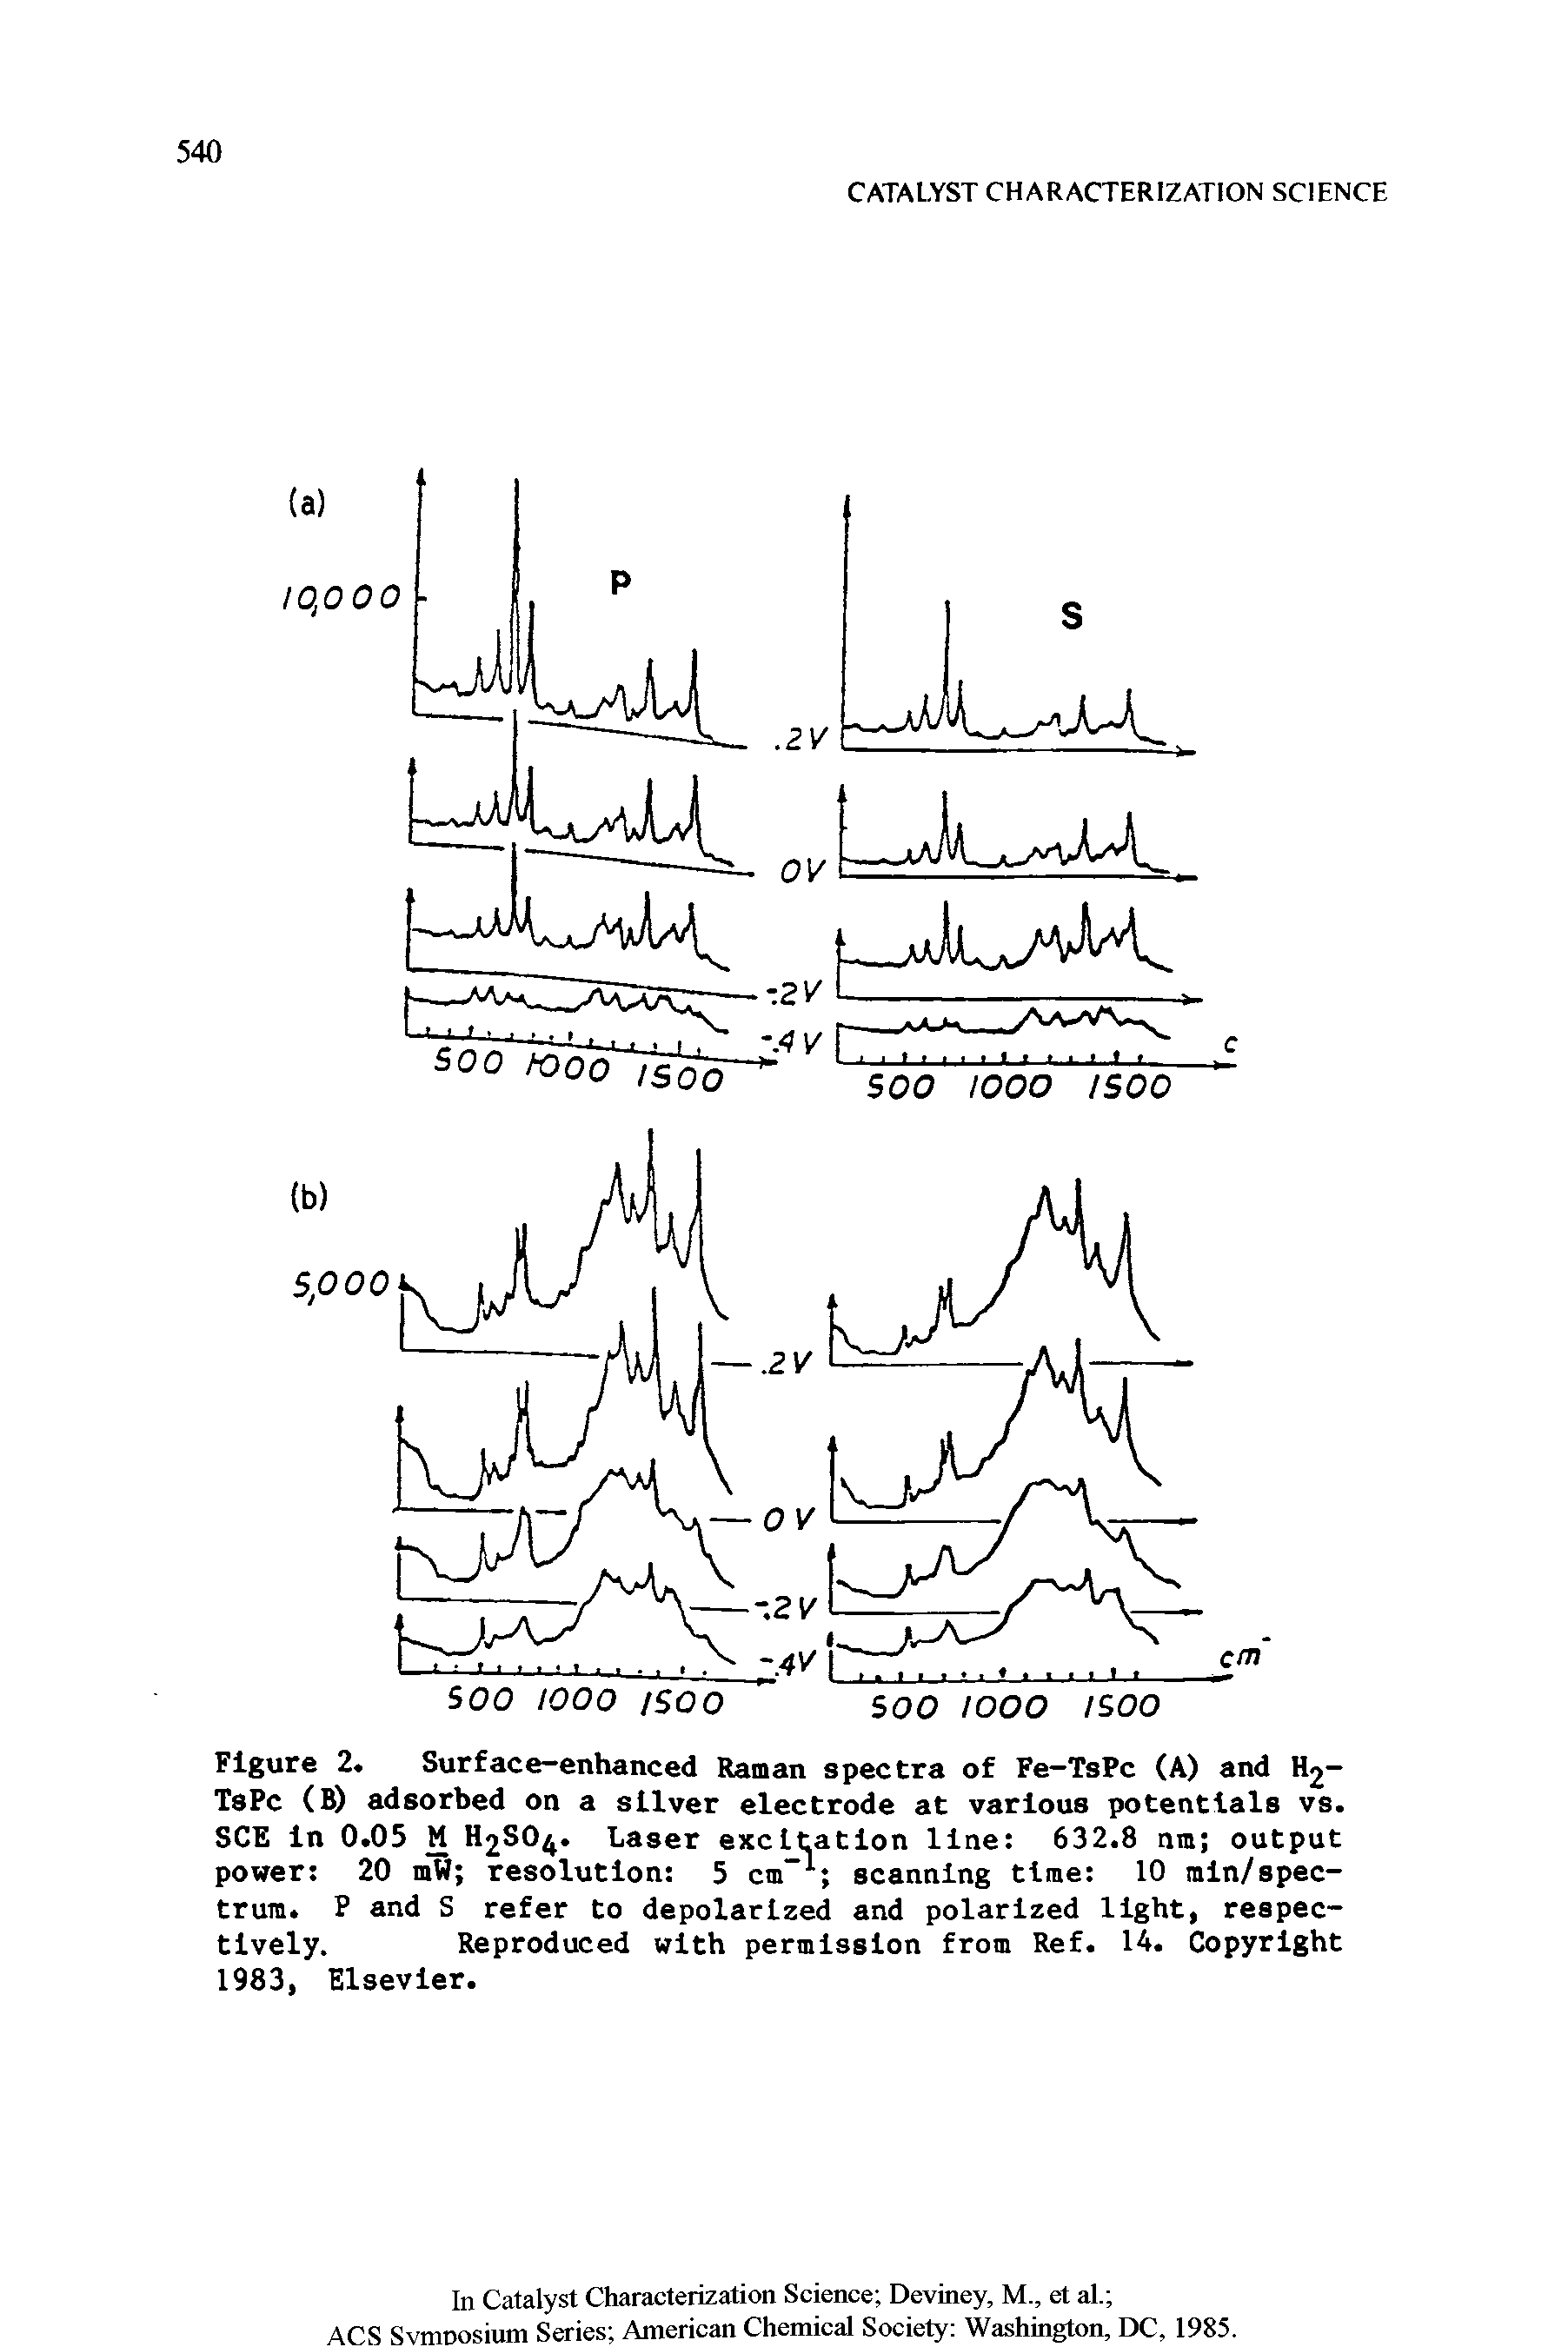 Figure 2. Surface-enhanced Raman spectra of Fe-TsPc (A) and H2-TsPc (B) adsorbed on a sliver electrode at various potentials vs. SCE In 0.05 M H2SO4. Laser excitation line 632.8 nm output...